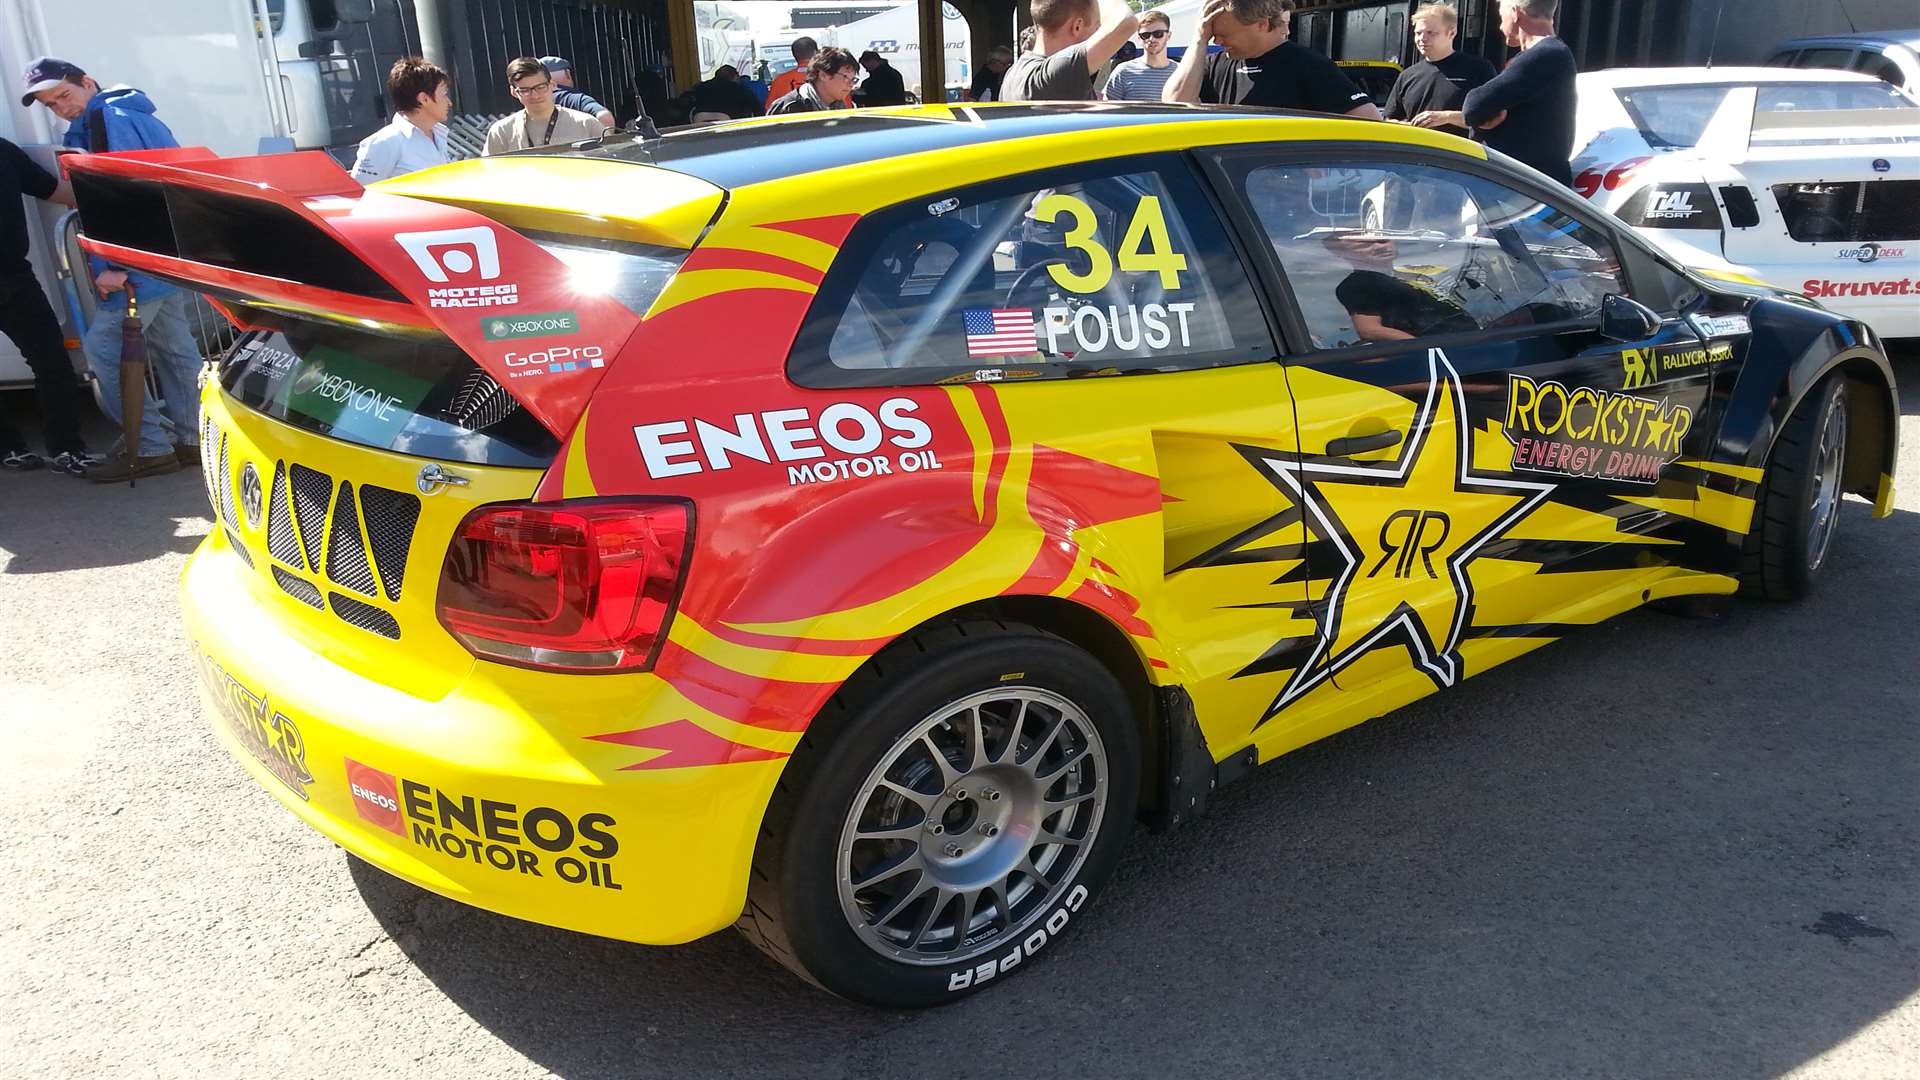 Tanner Foust's new VW Polo made an appearance in the afternoon